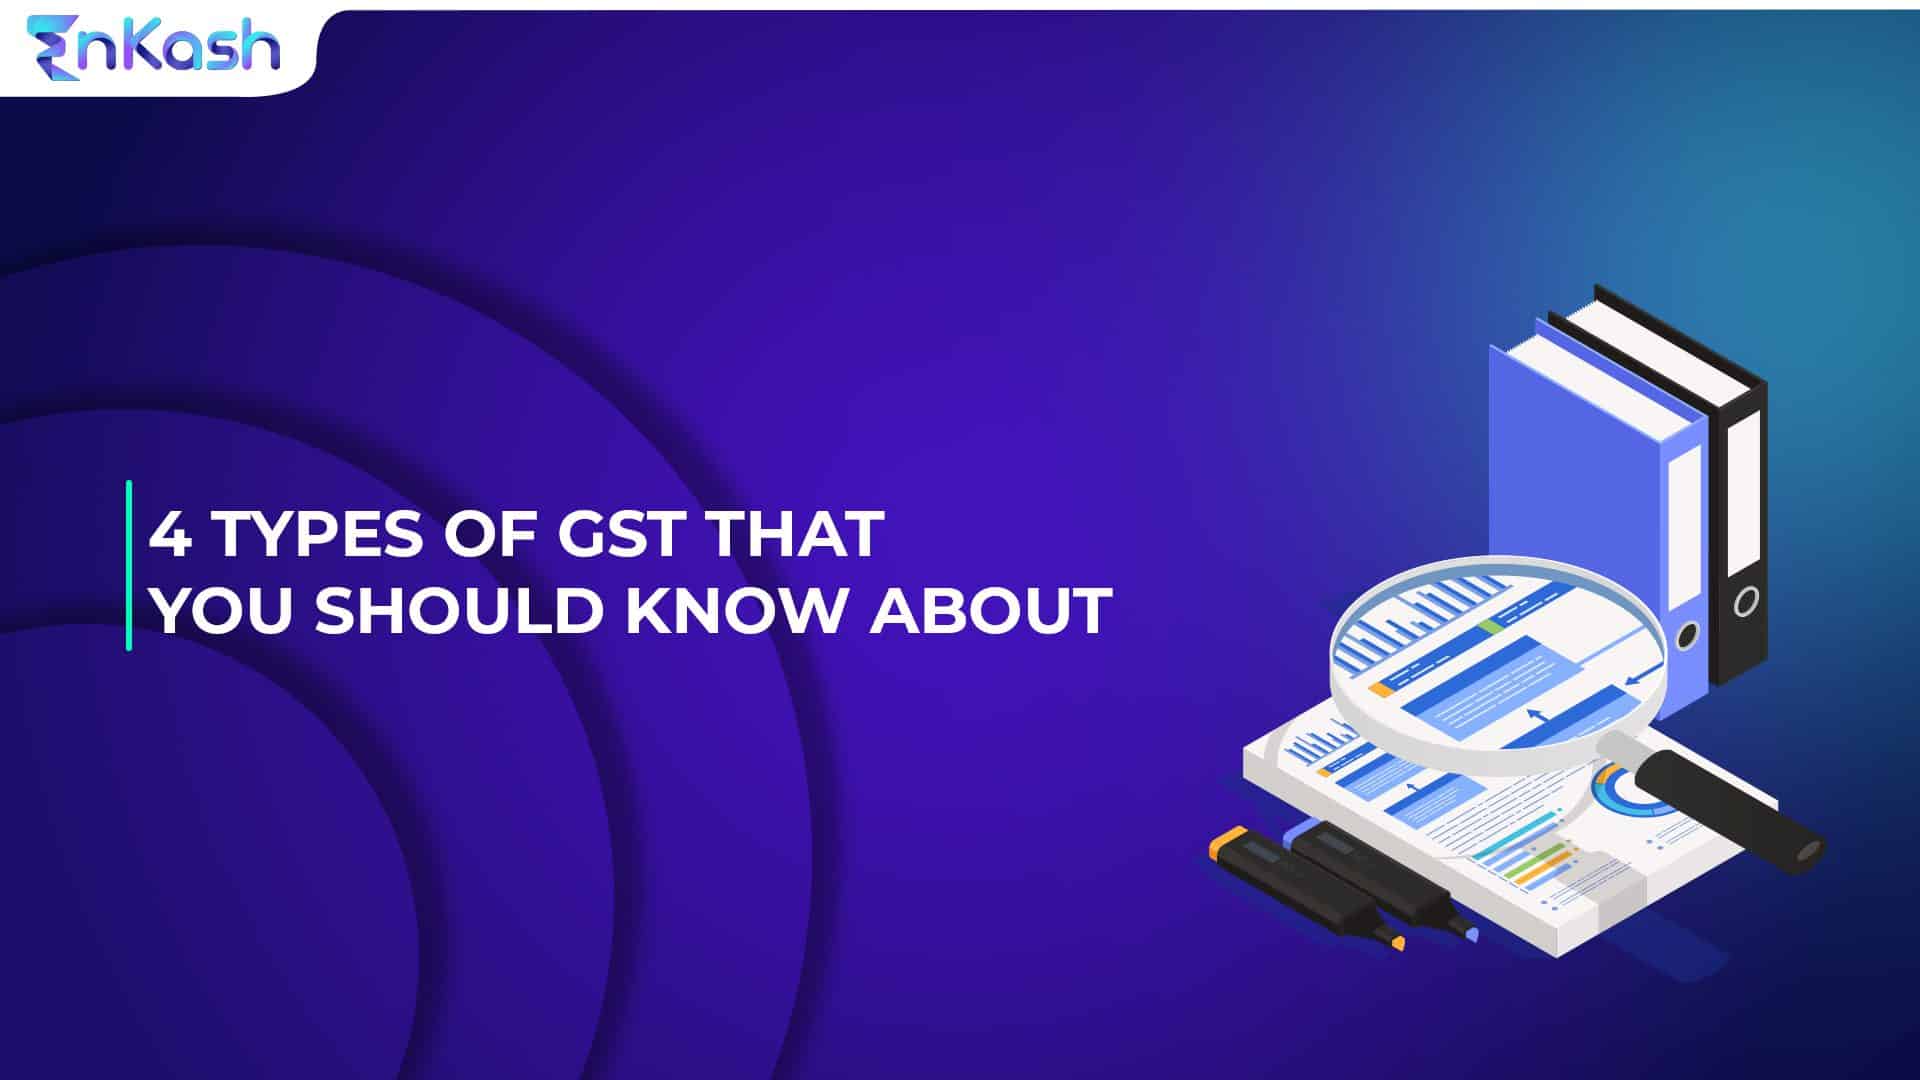 Types of GST in India